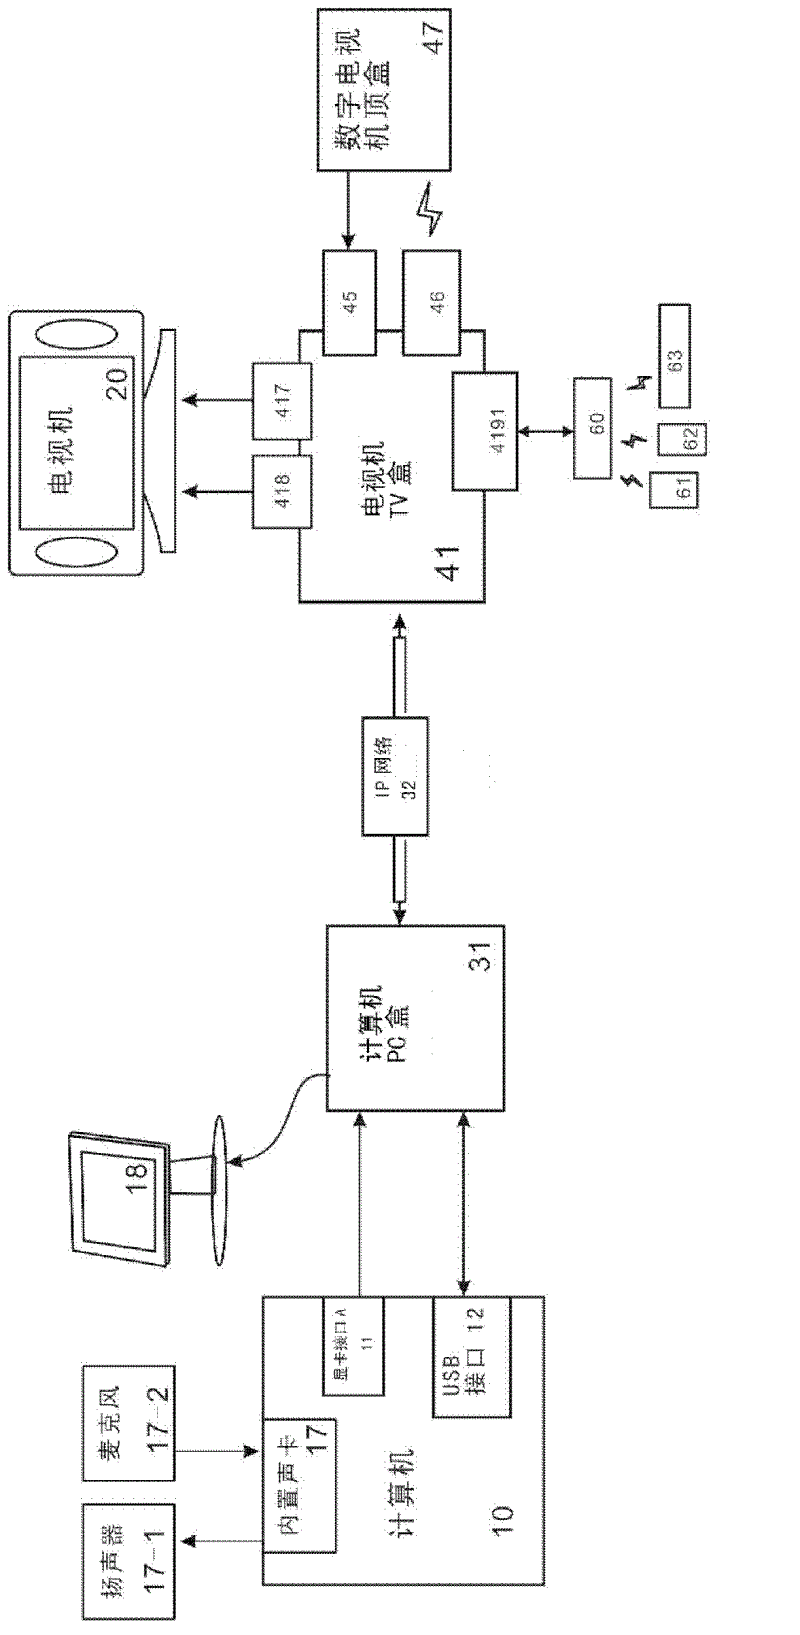 Method and system for performing interactive entertainment by utilizing IP (internet protocol) network to connect television with computer